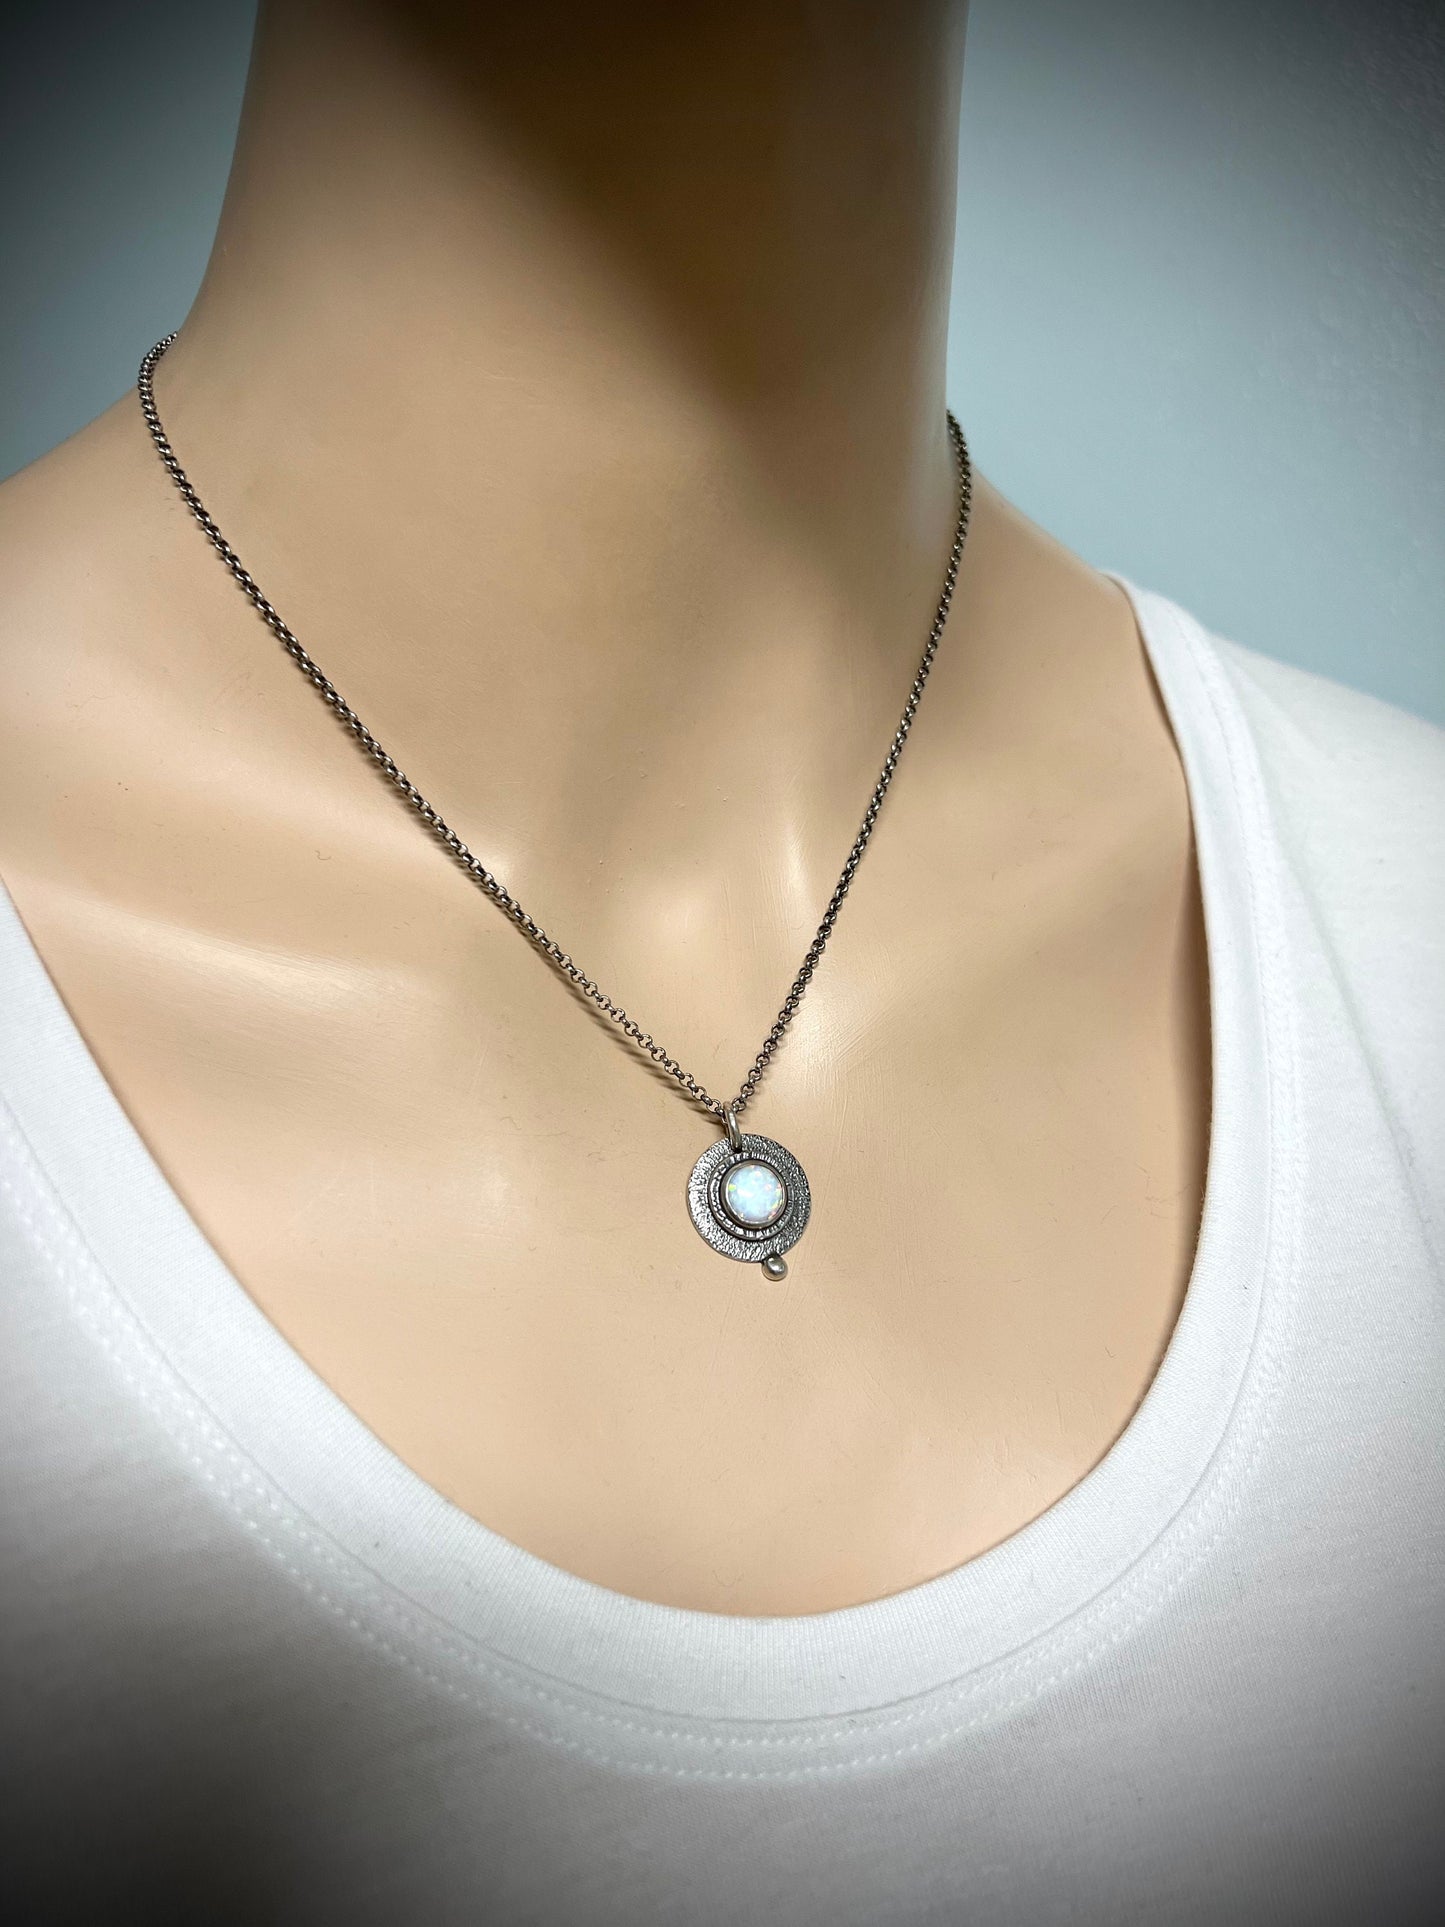 Sterling Silver Simulated Opal Necklace - Handmade Pendant on Sterling Silver Chain